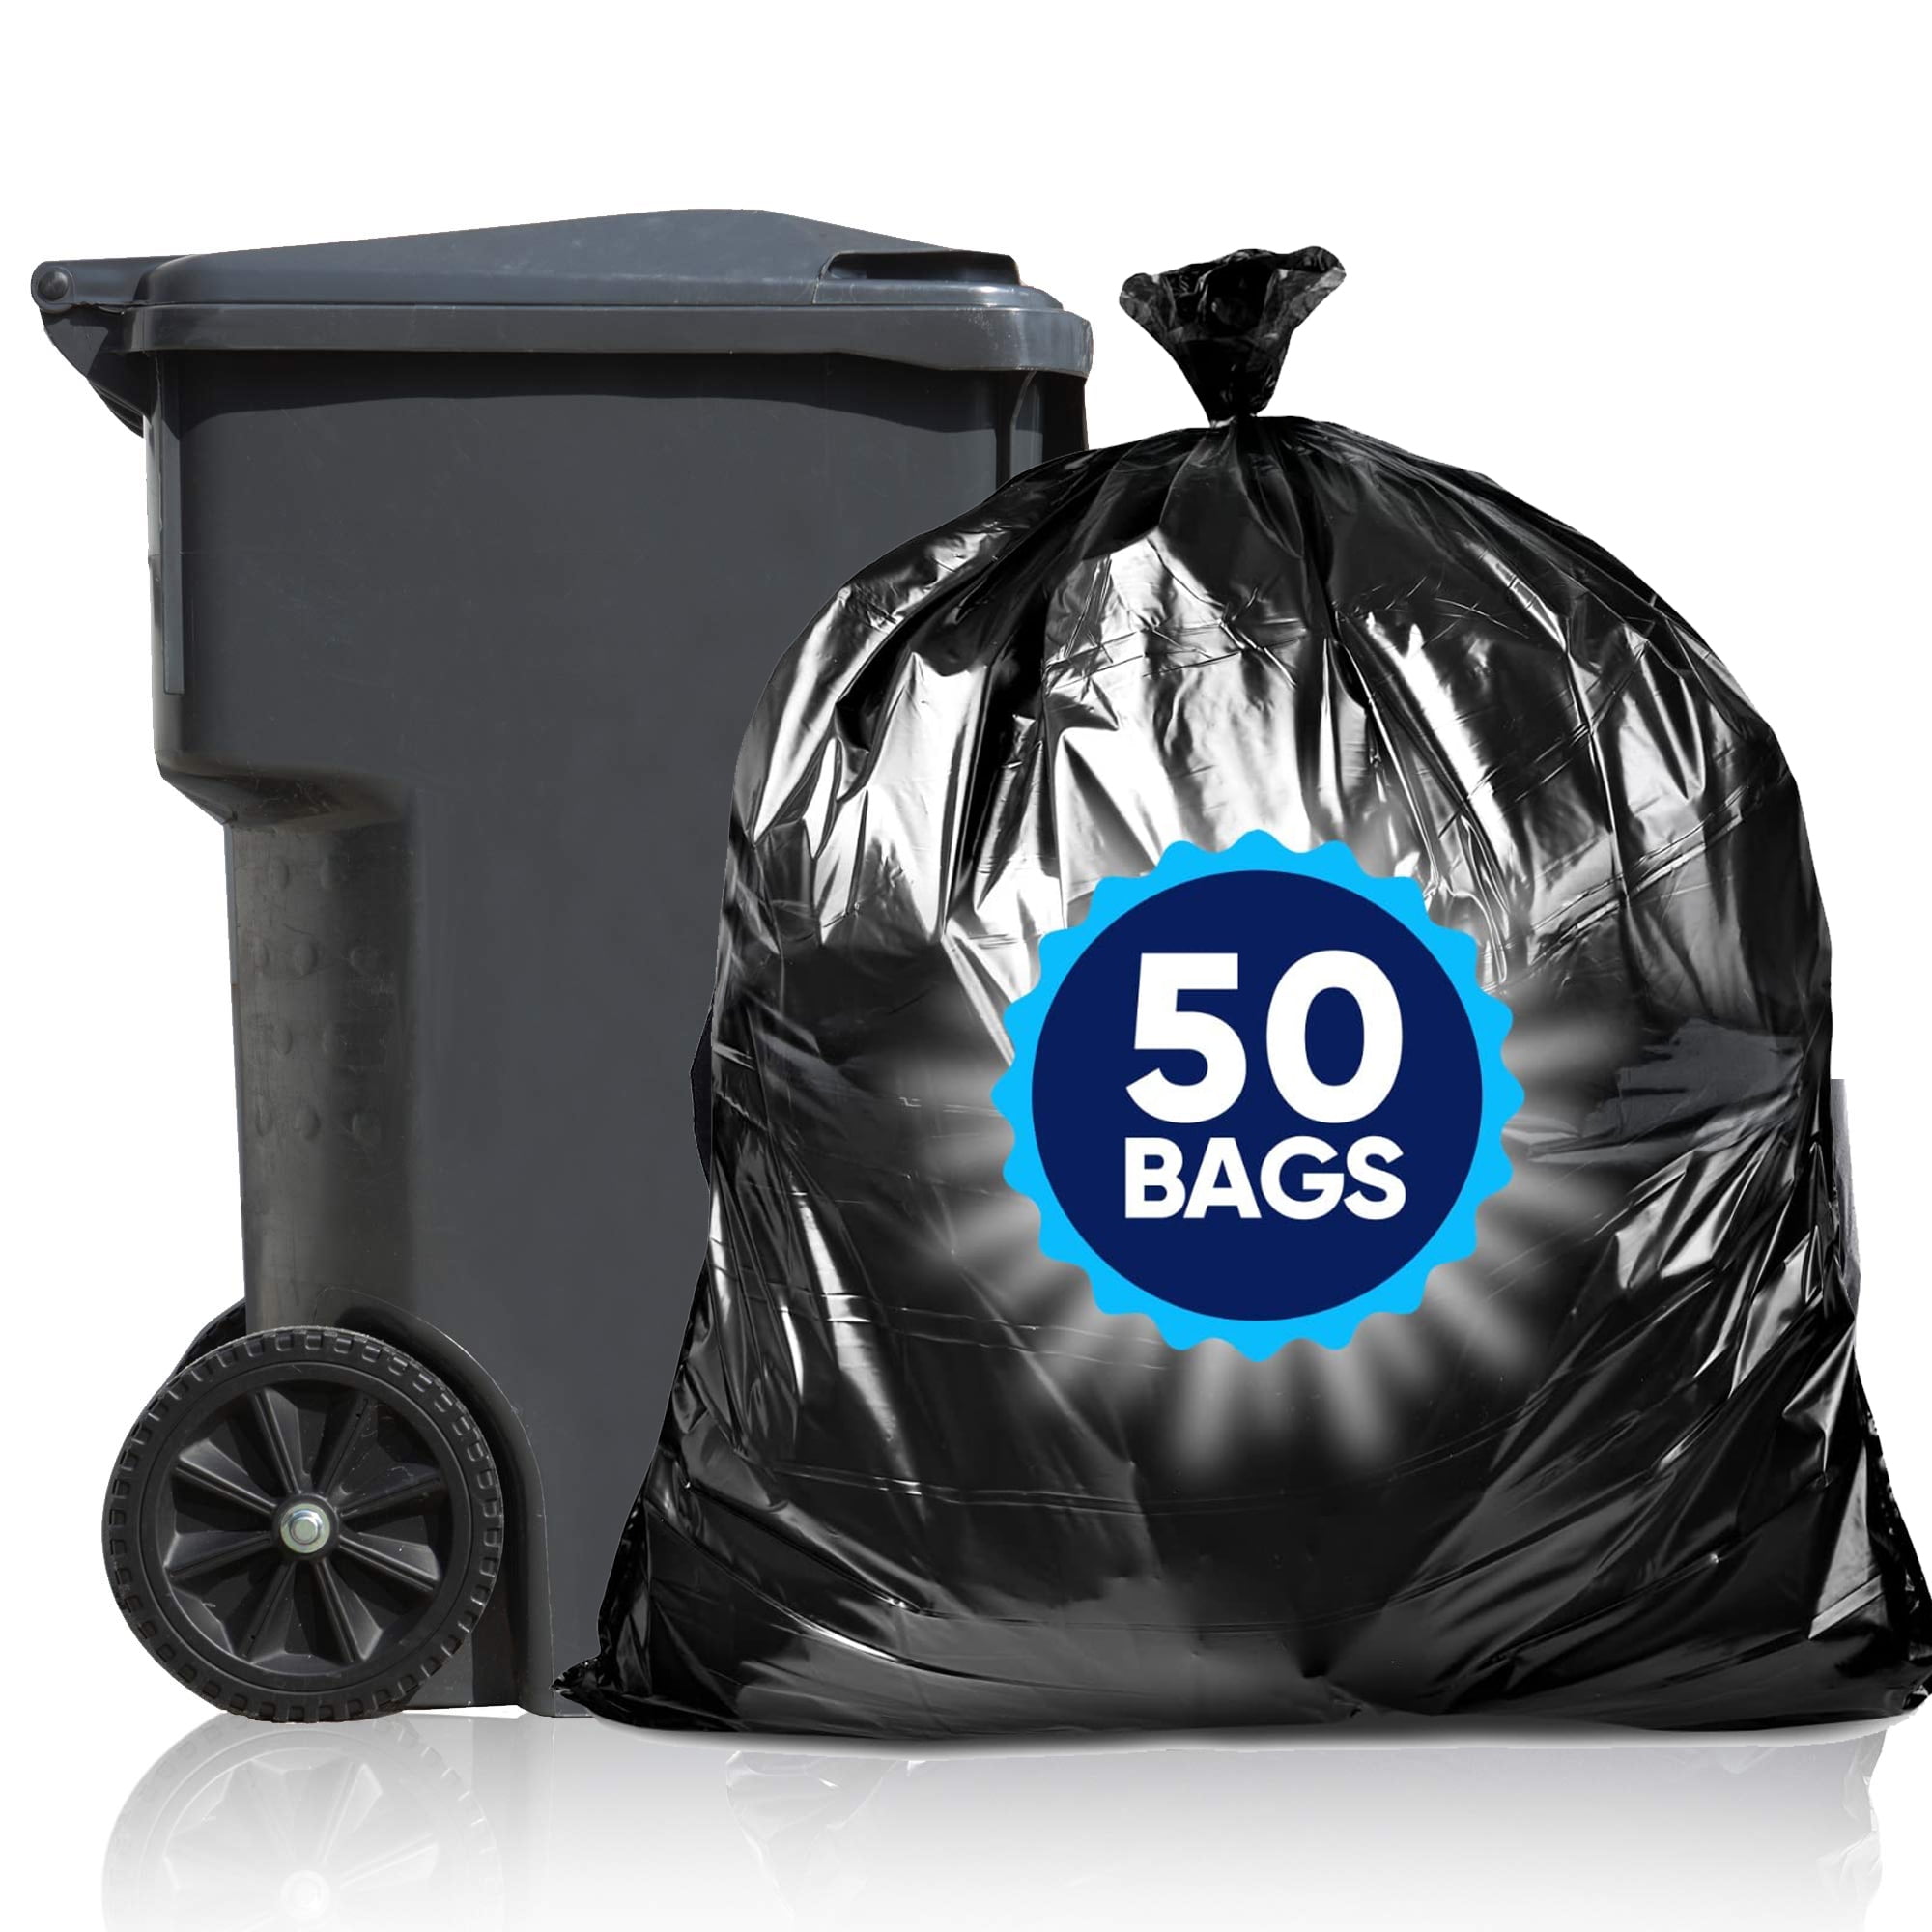 The 5 Best Trash Bags